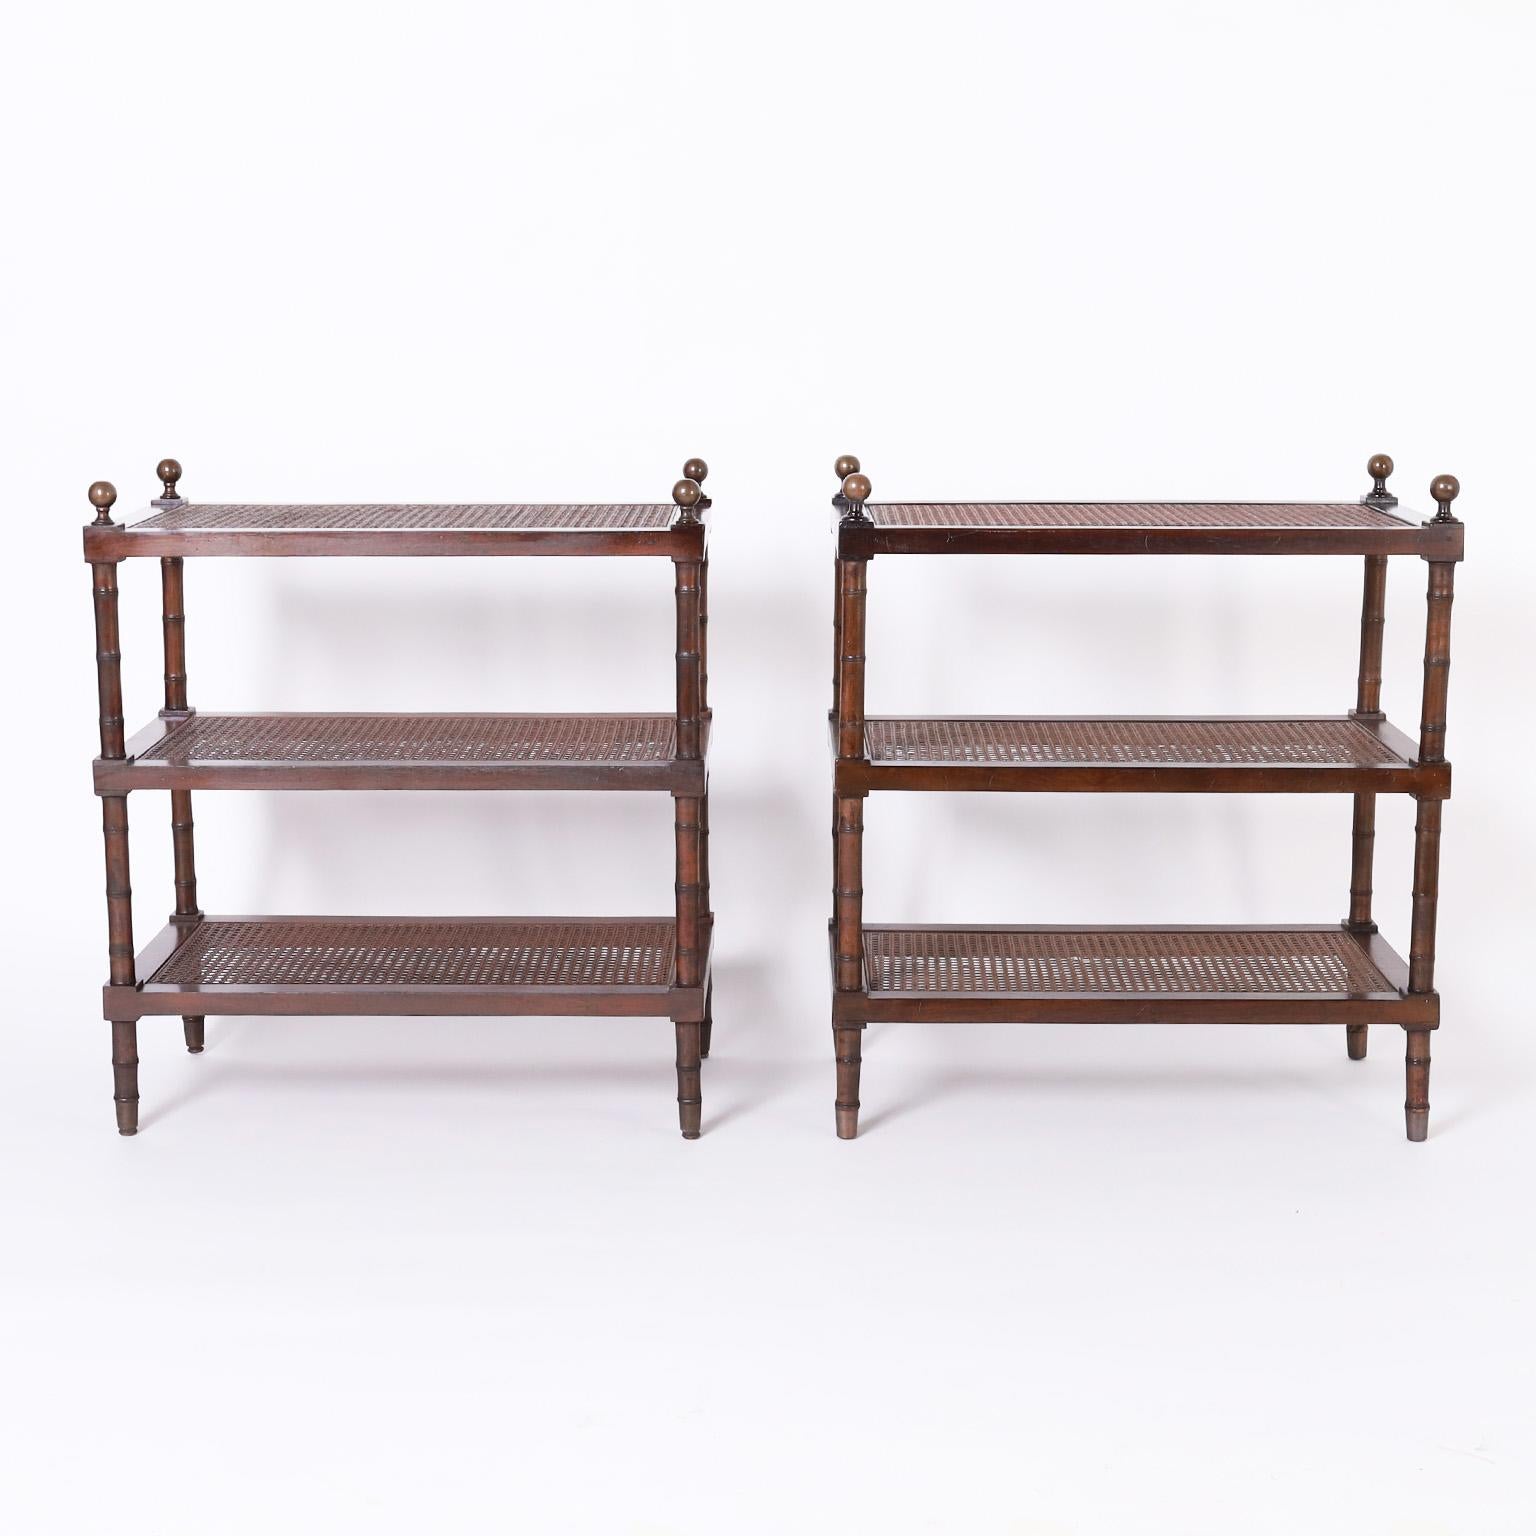 Standout pair of British colonial style stands or tables crafted in mahogany having brass finials, three caned tiers with the top tier over glass, and faux bamboo supports and legs.